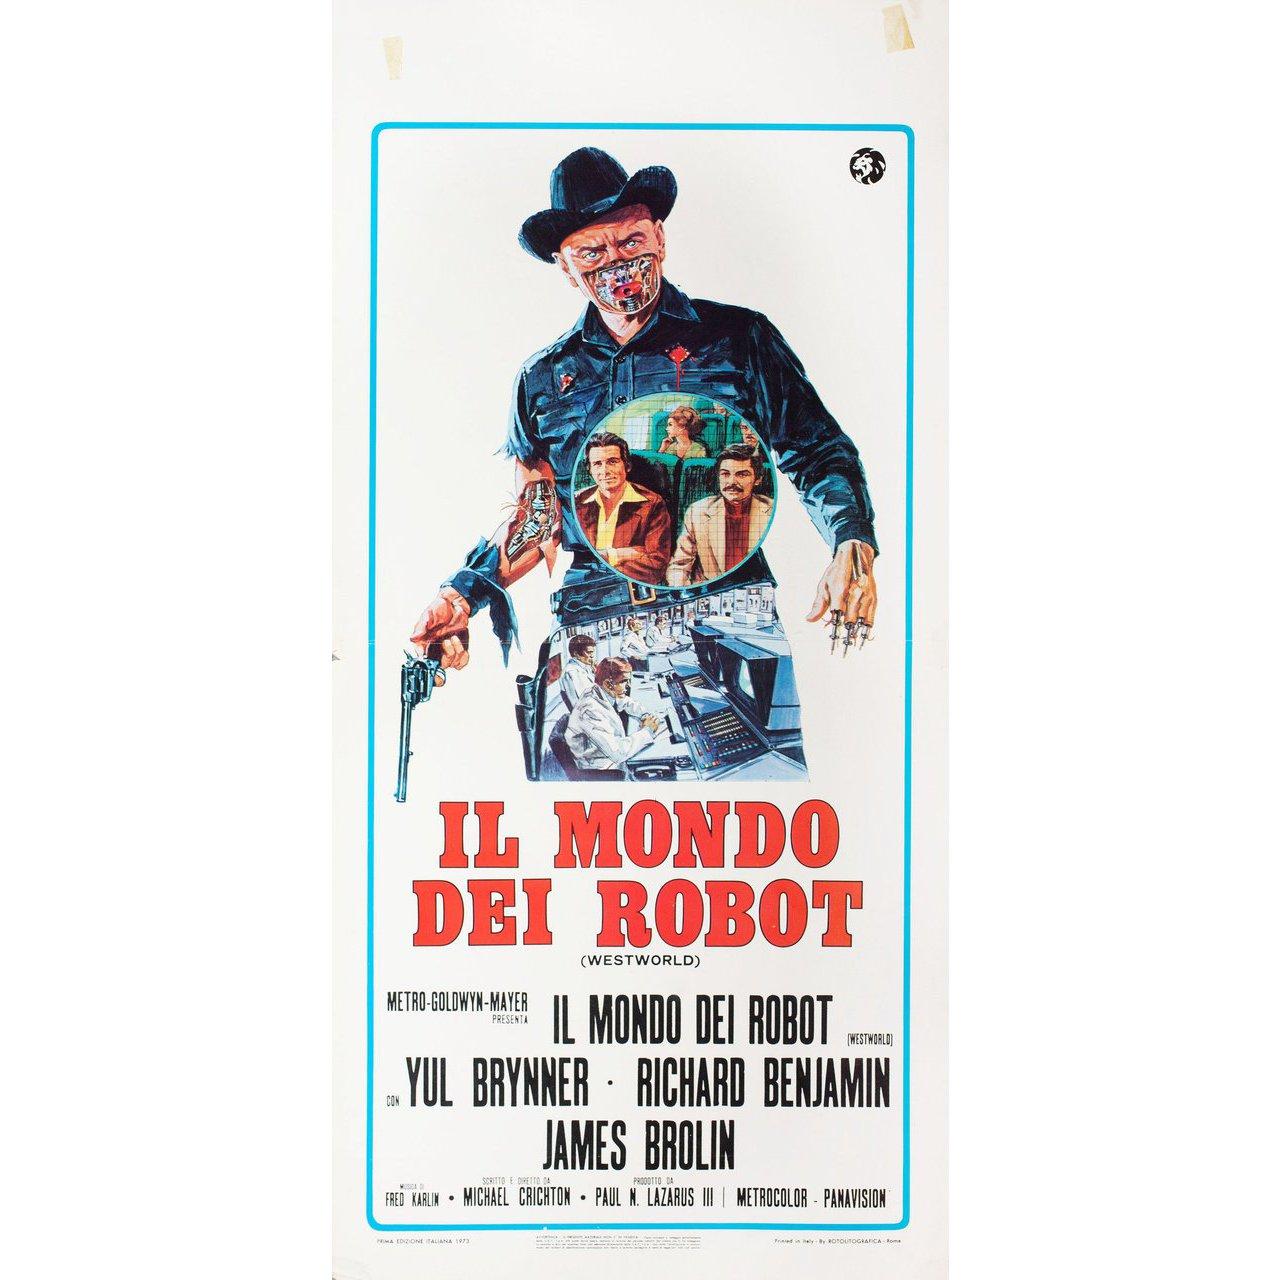 Original 1973 Italian locandina poster for the film Westworld directed by Michael Crichton with Yul Brynner / Richard Benjamin / James Brolin / Norman Bartold. Very good-fine condition, folded. Many original posters were issued folded or were